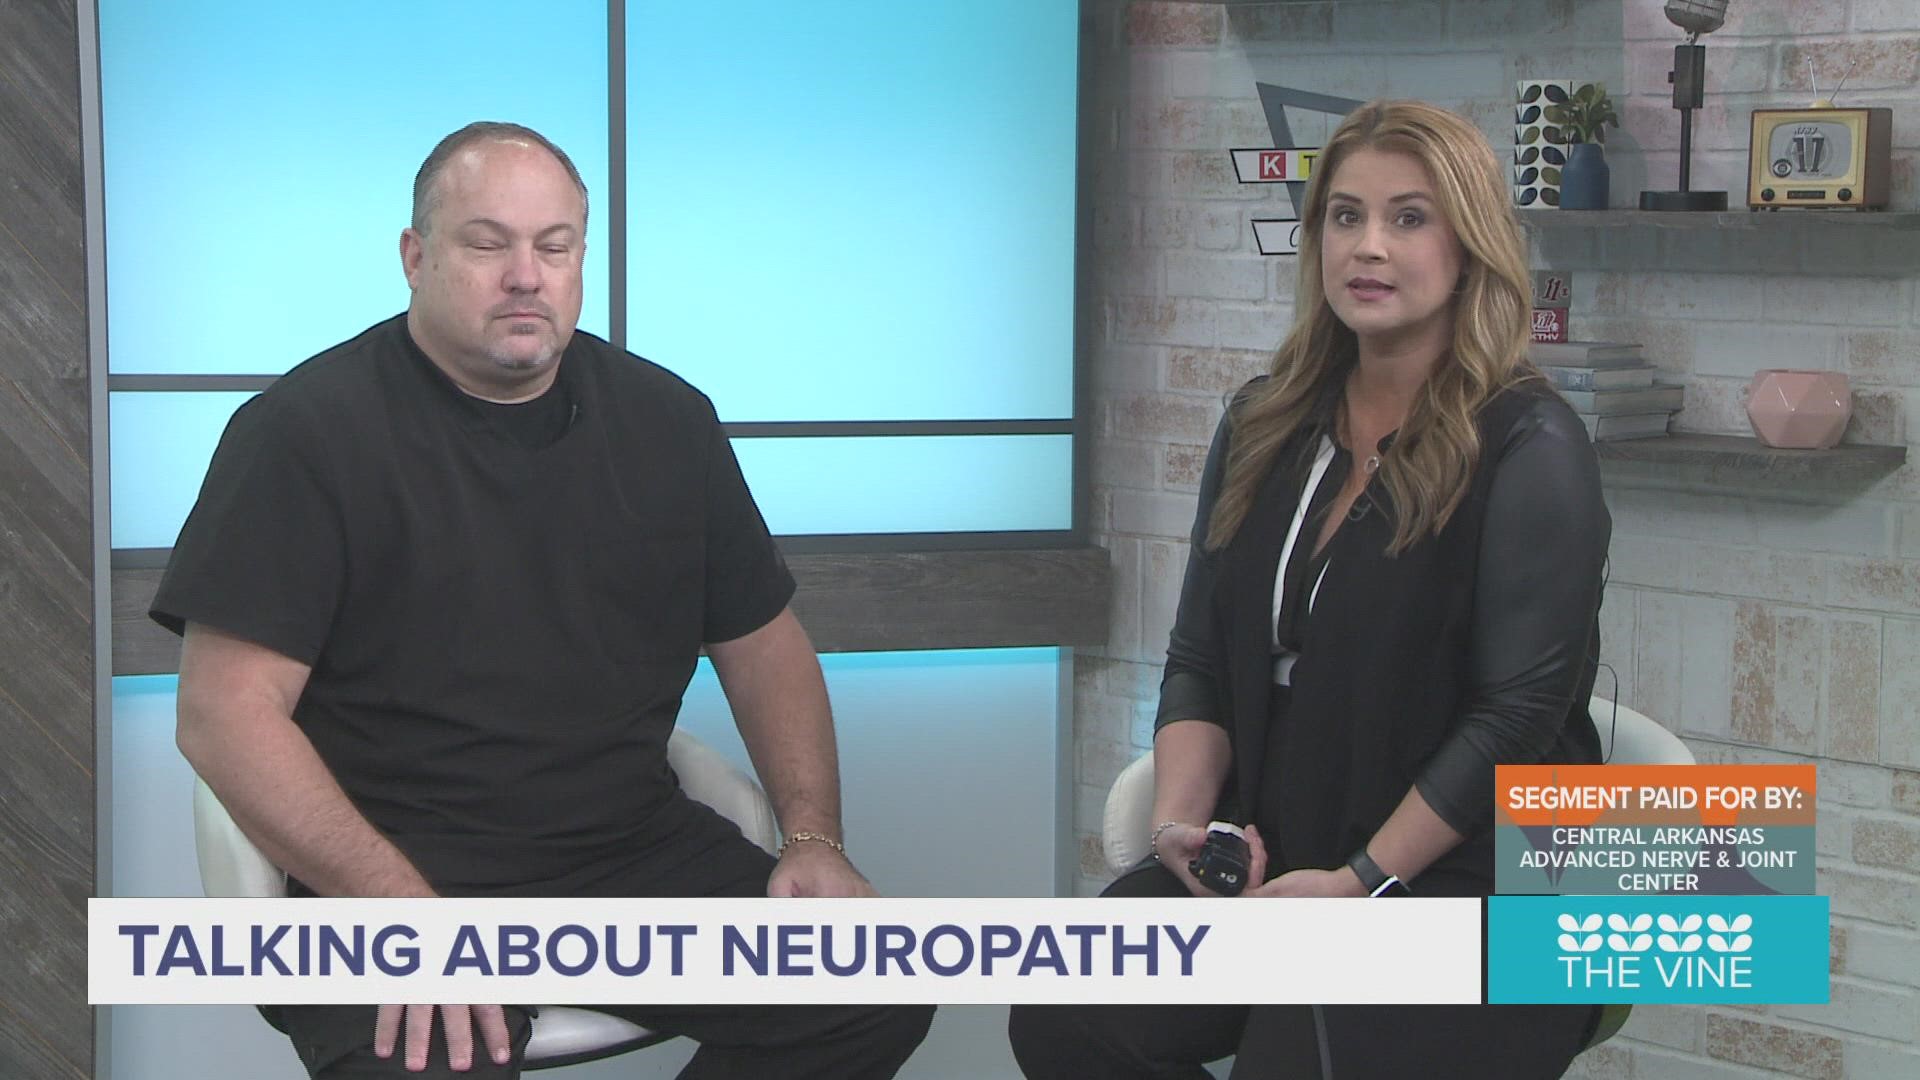 Dr. Ryan Helms is here with Central Arkansas Advanced Nerve and Joint Center to tell us how they help their patients get out of pain and get back to doing things.